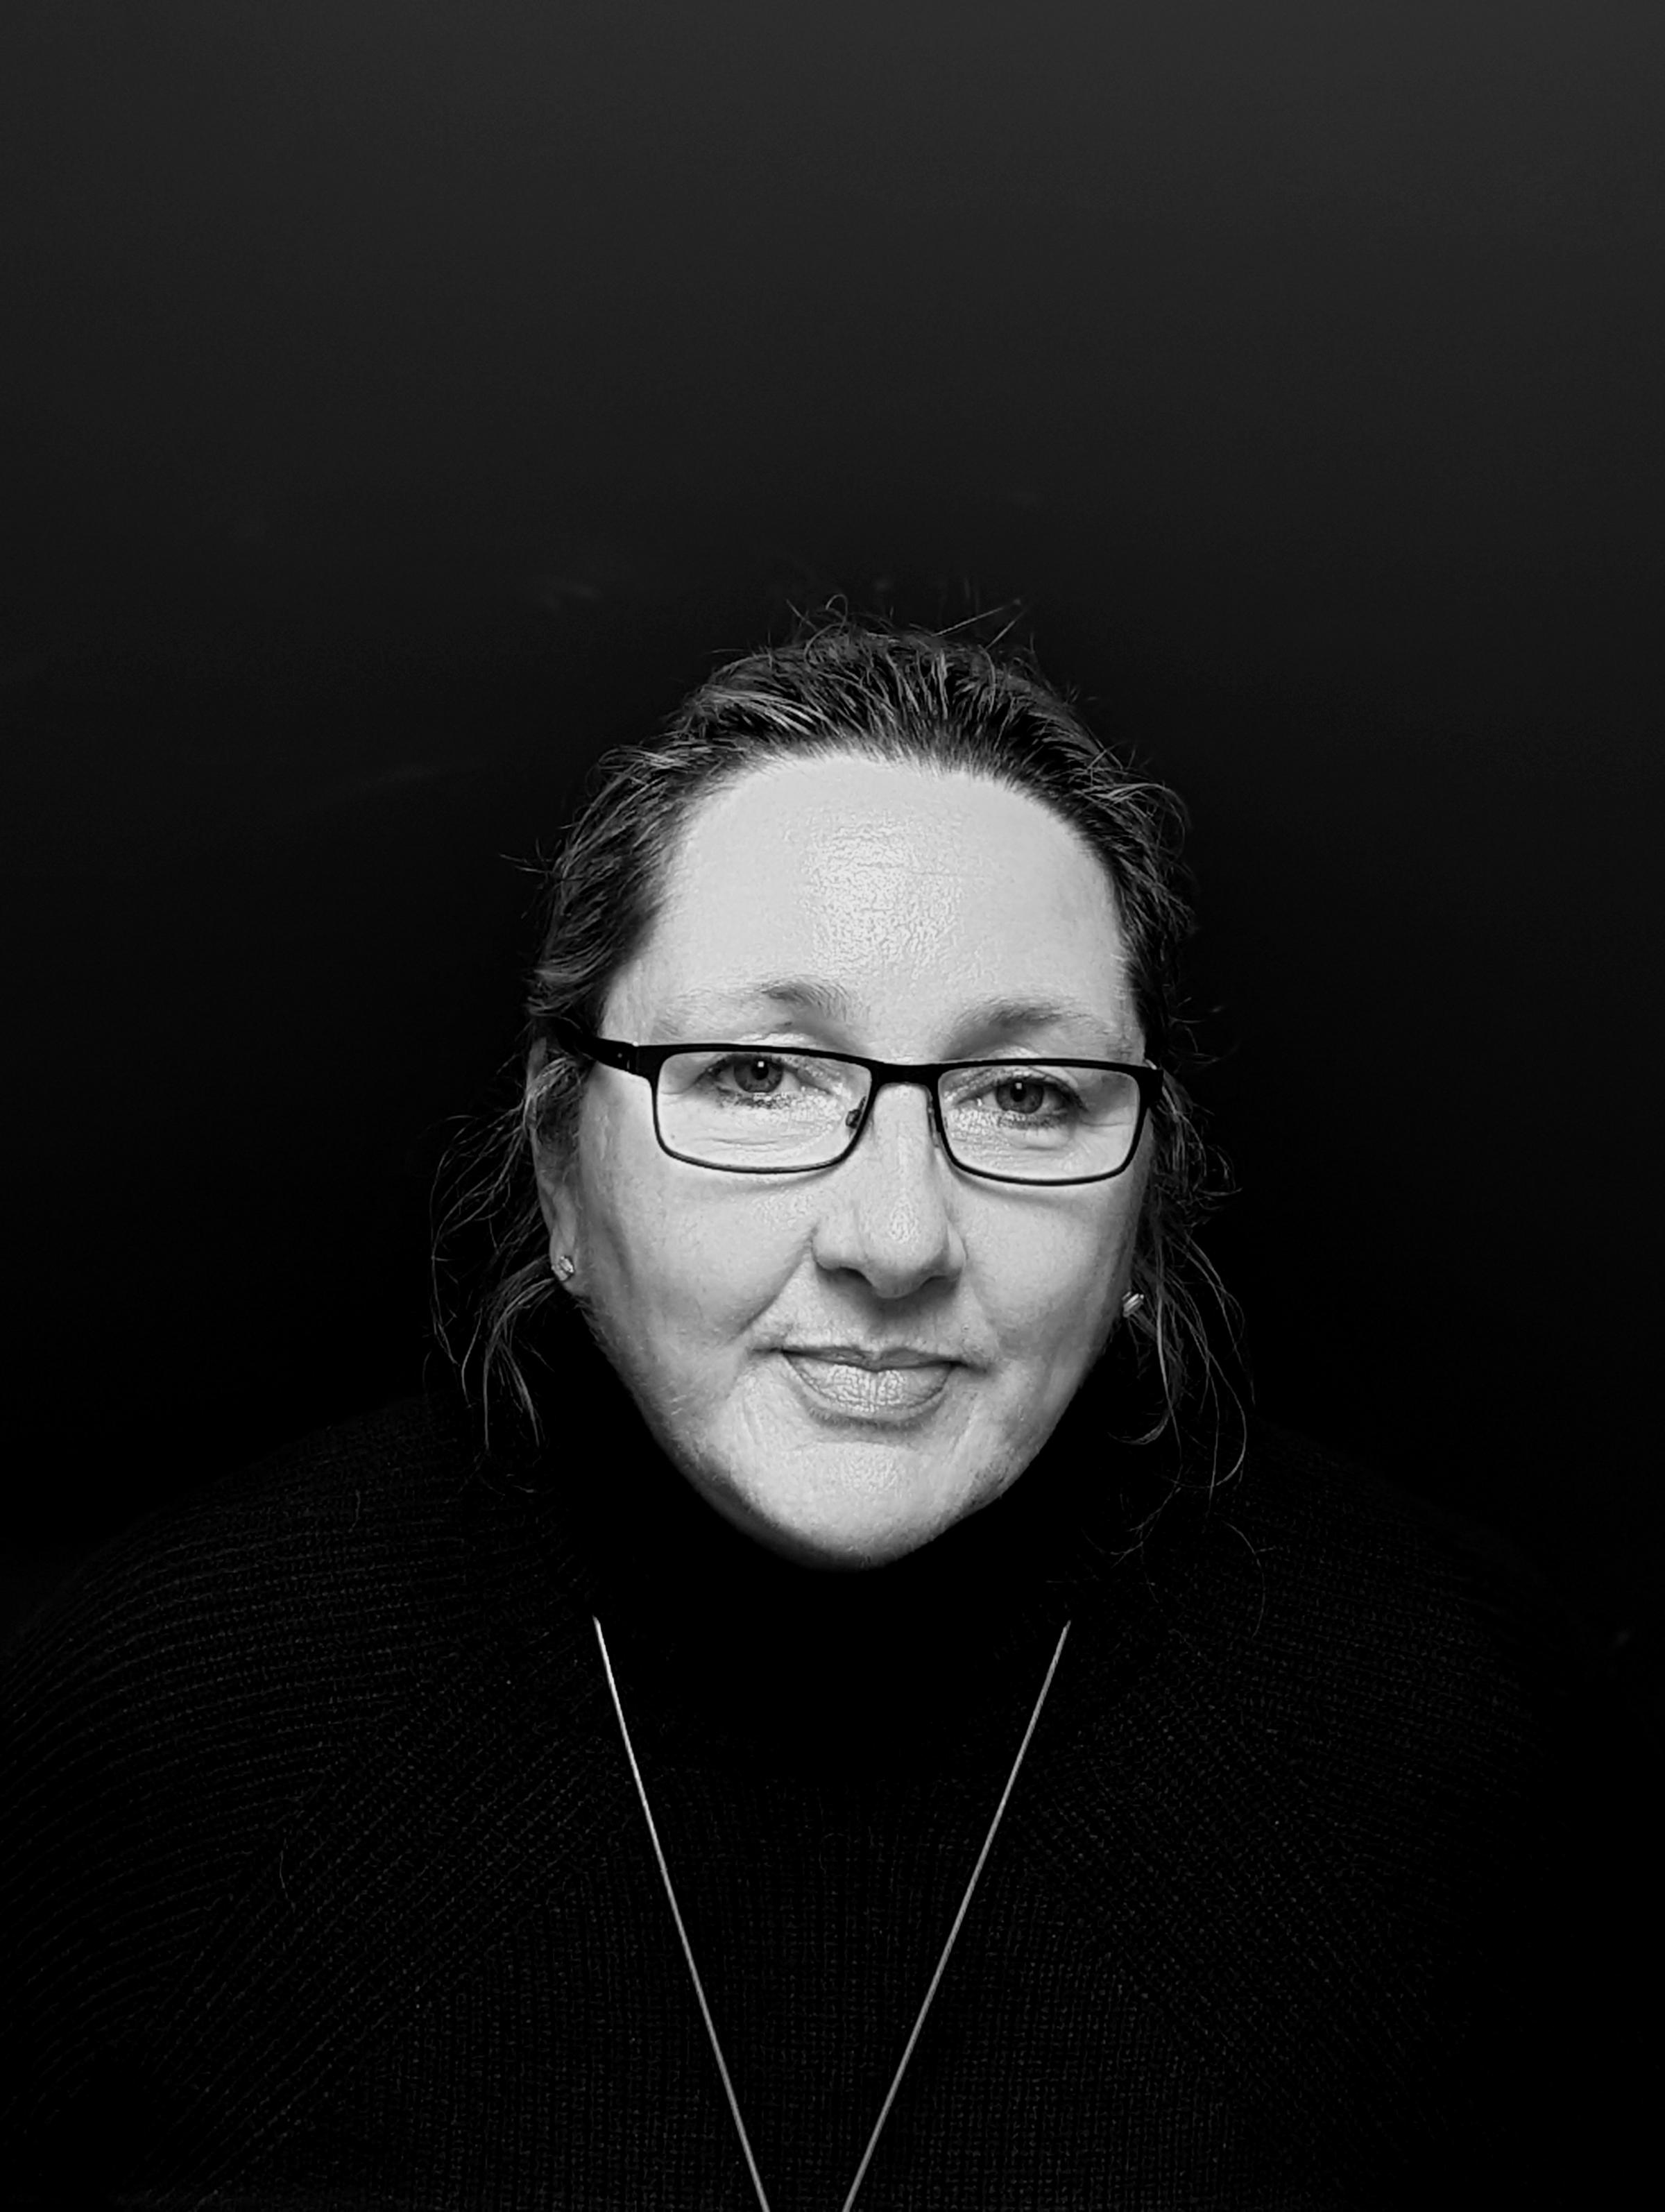 Meriel Neighbour, Head of Digital Product Delivery and Transformation at Clarks,